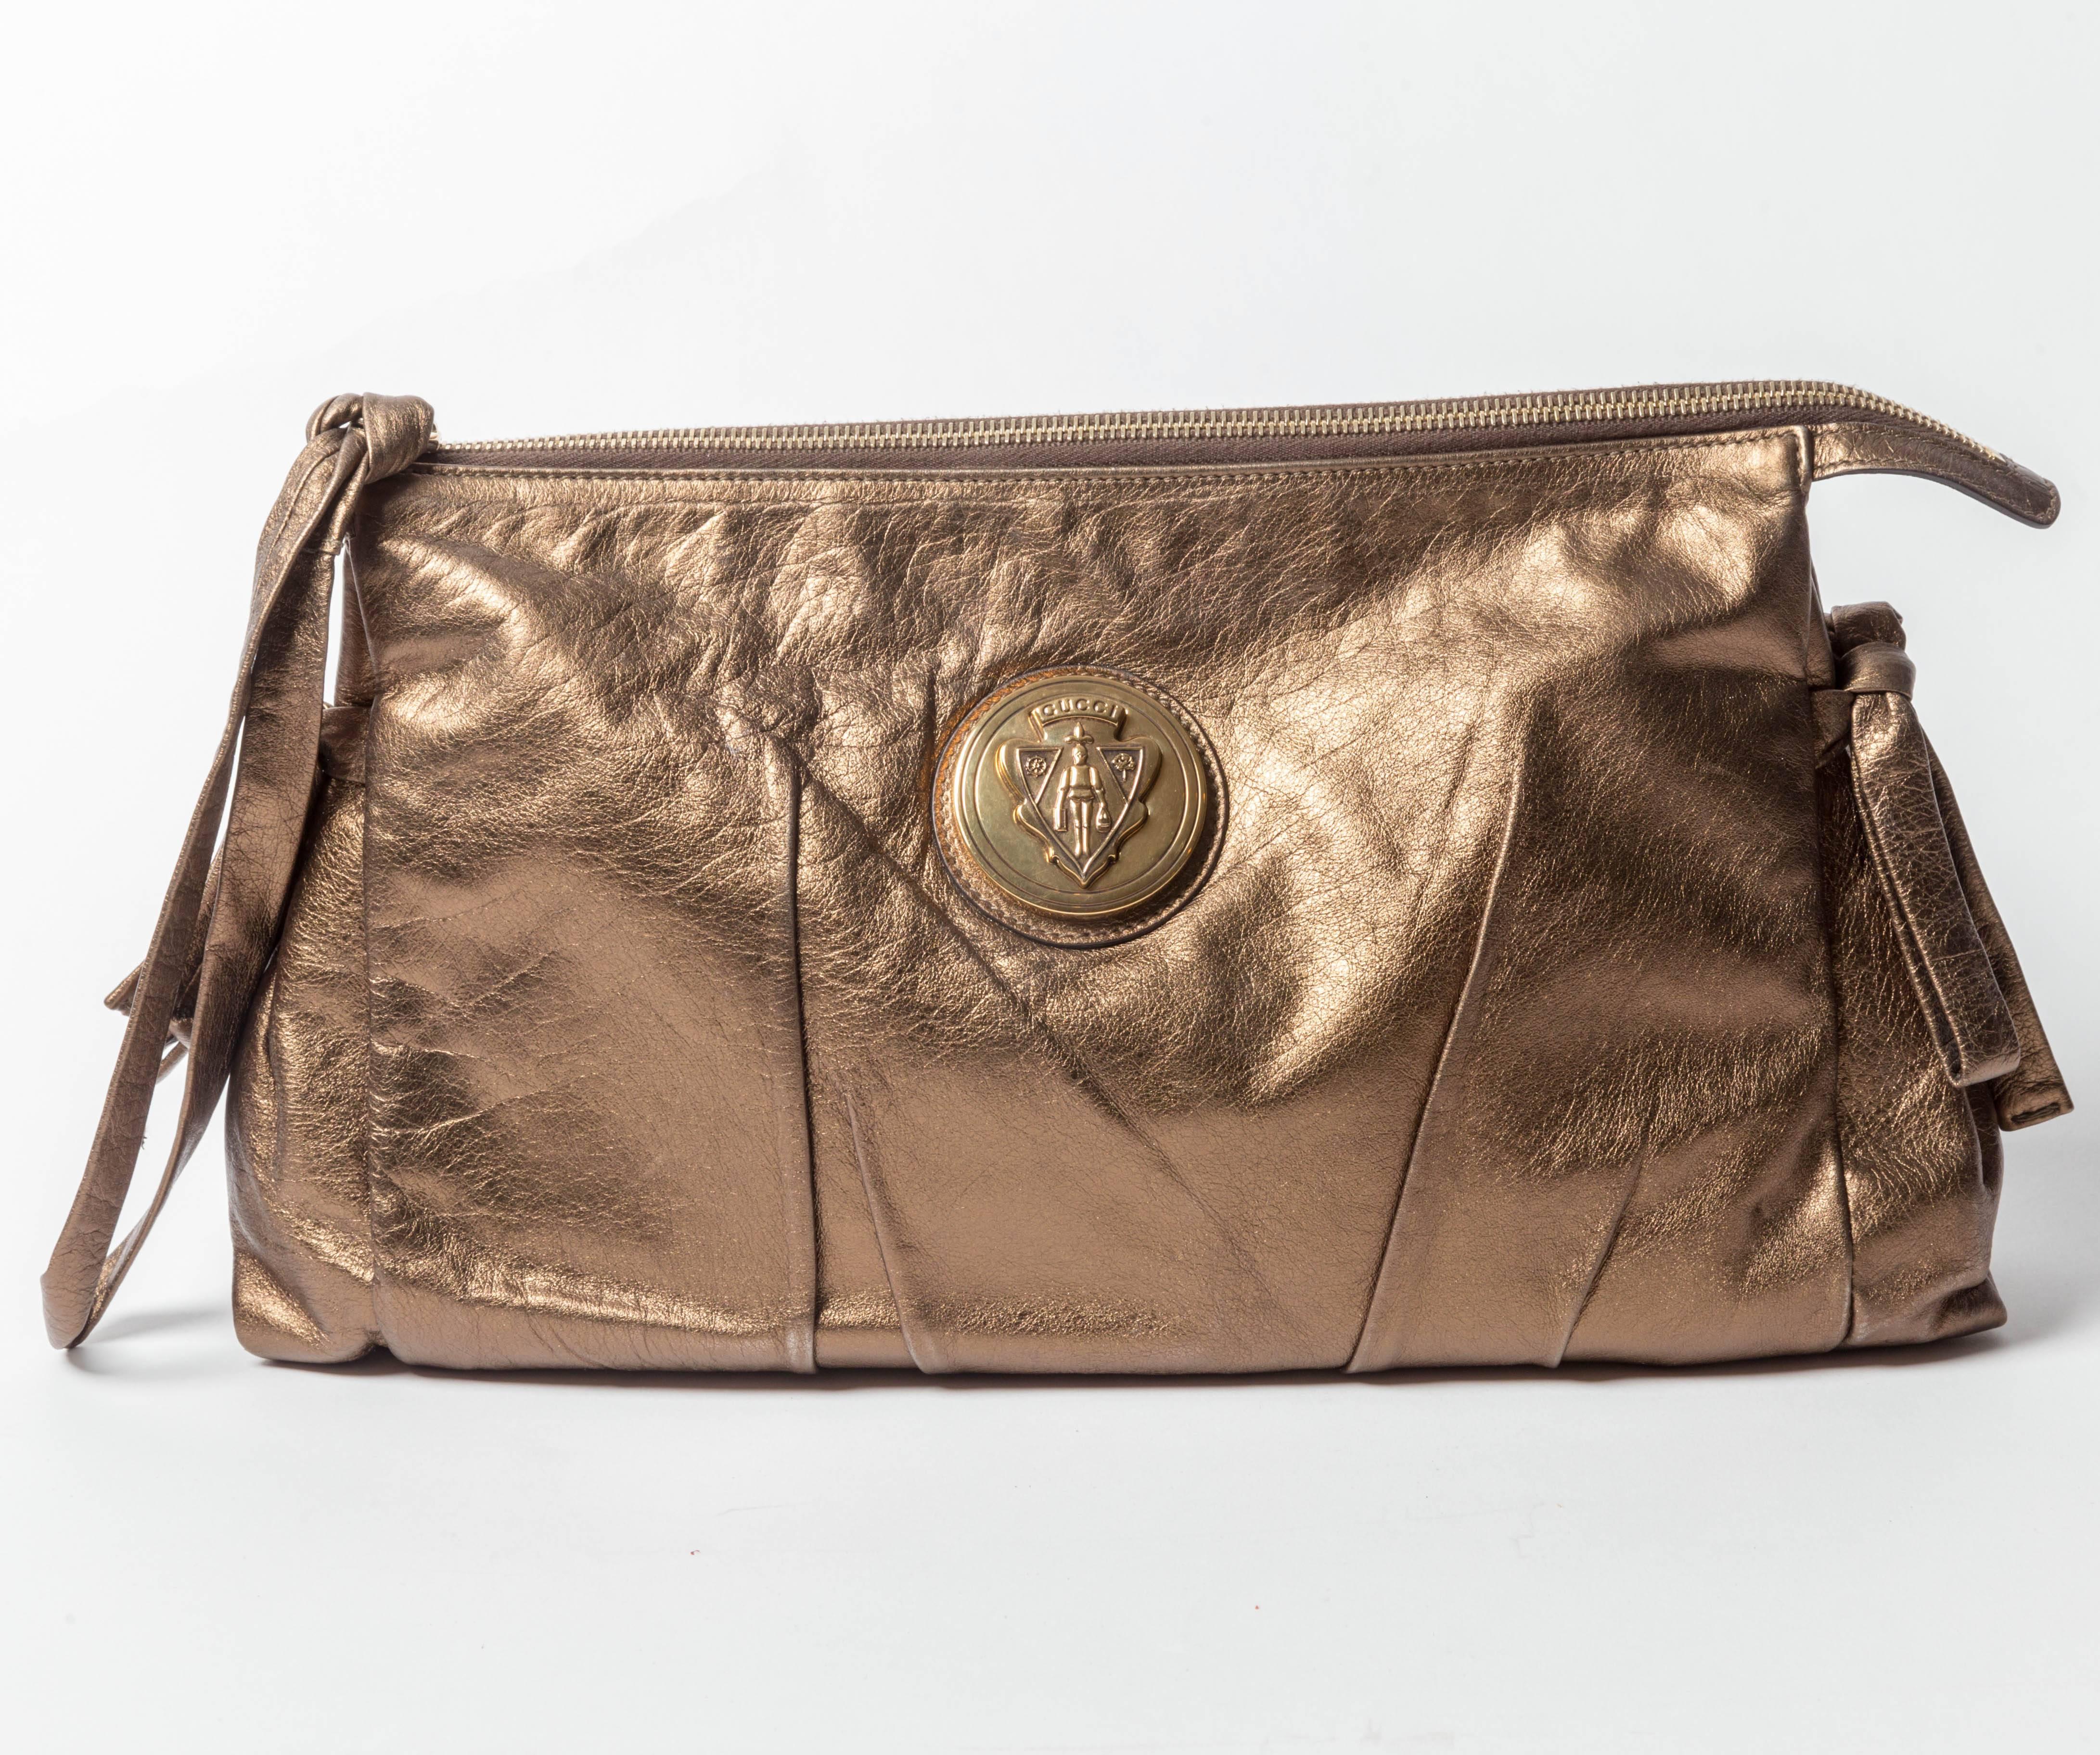 Large Vintage Gucci Clutch in Metallic Bronze Leather with Large Gold Gucci Medallion
Zip Closure
One interior zip pocket as well as a flap pocket for phone
Small mark to interior fabric lining
Exterior is in excellent condition